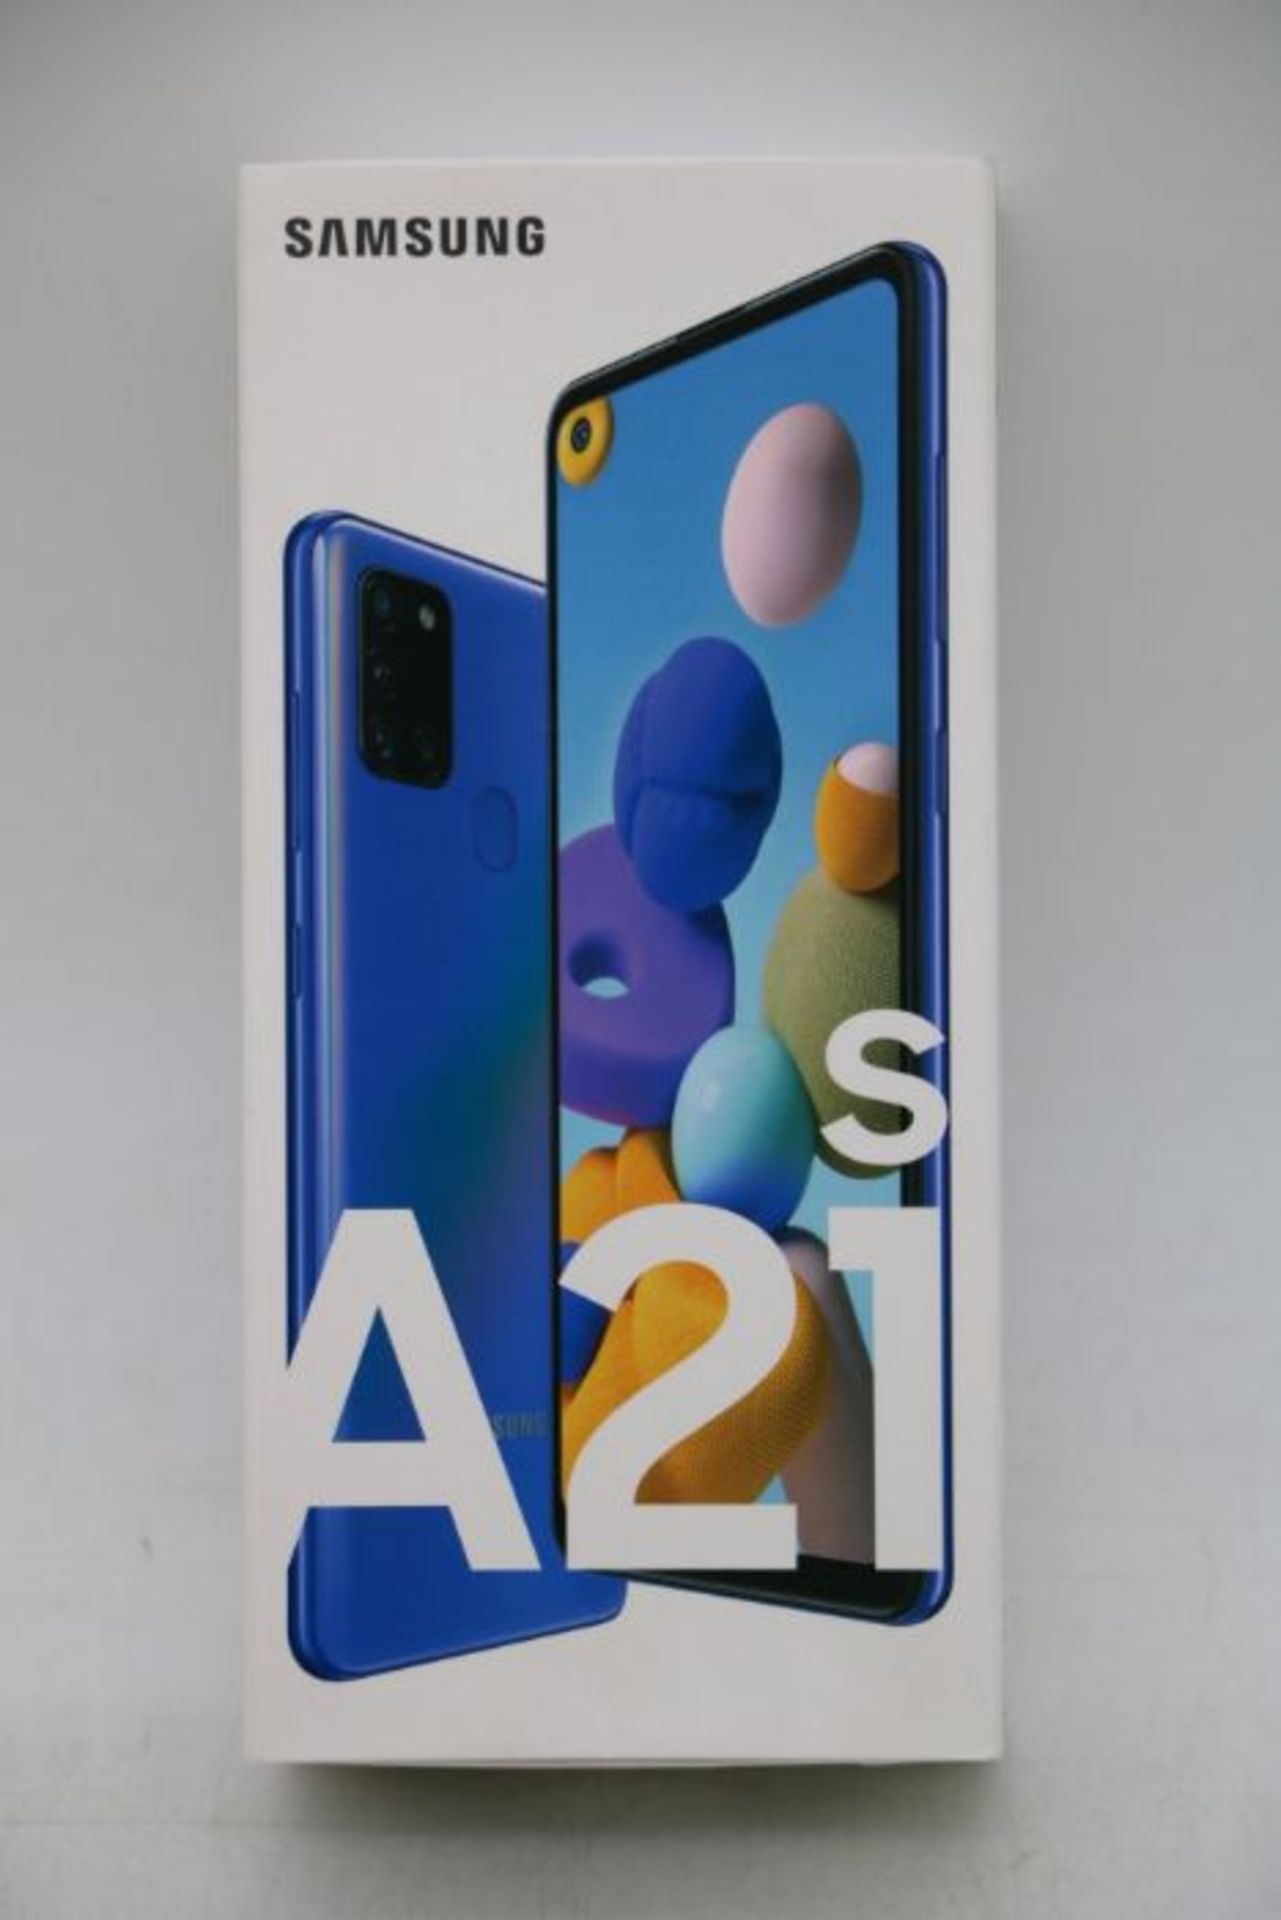 Samsung Galaxy A21s Android Mobile Phone, 64GB, Blue. Brand New, Sealed - Image 2 of 2